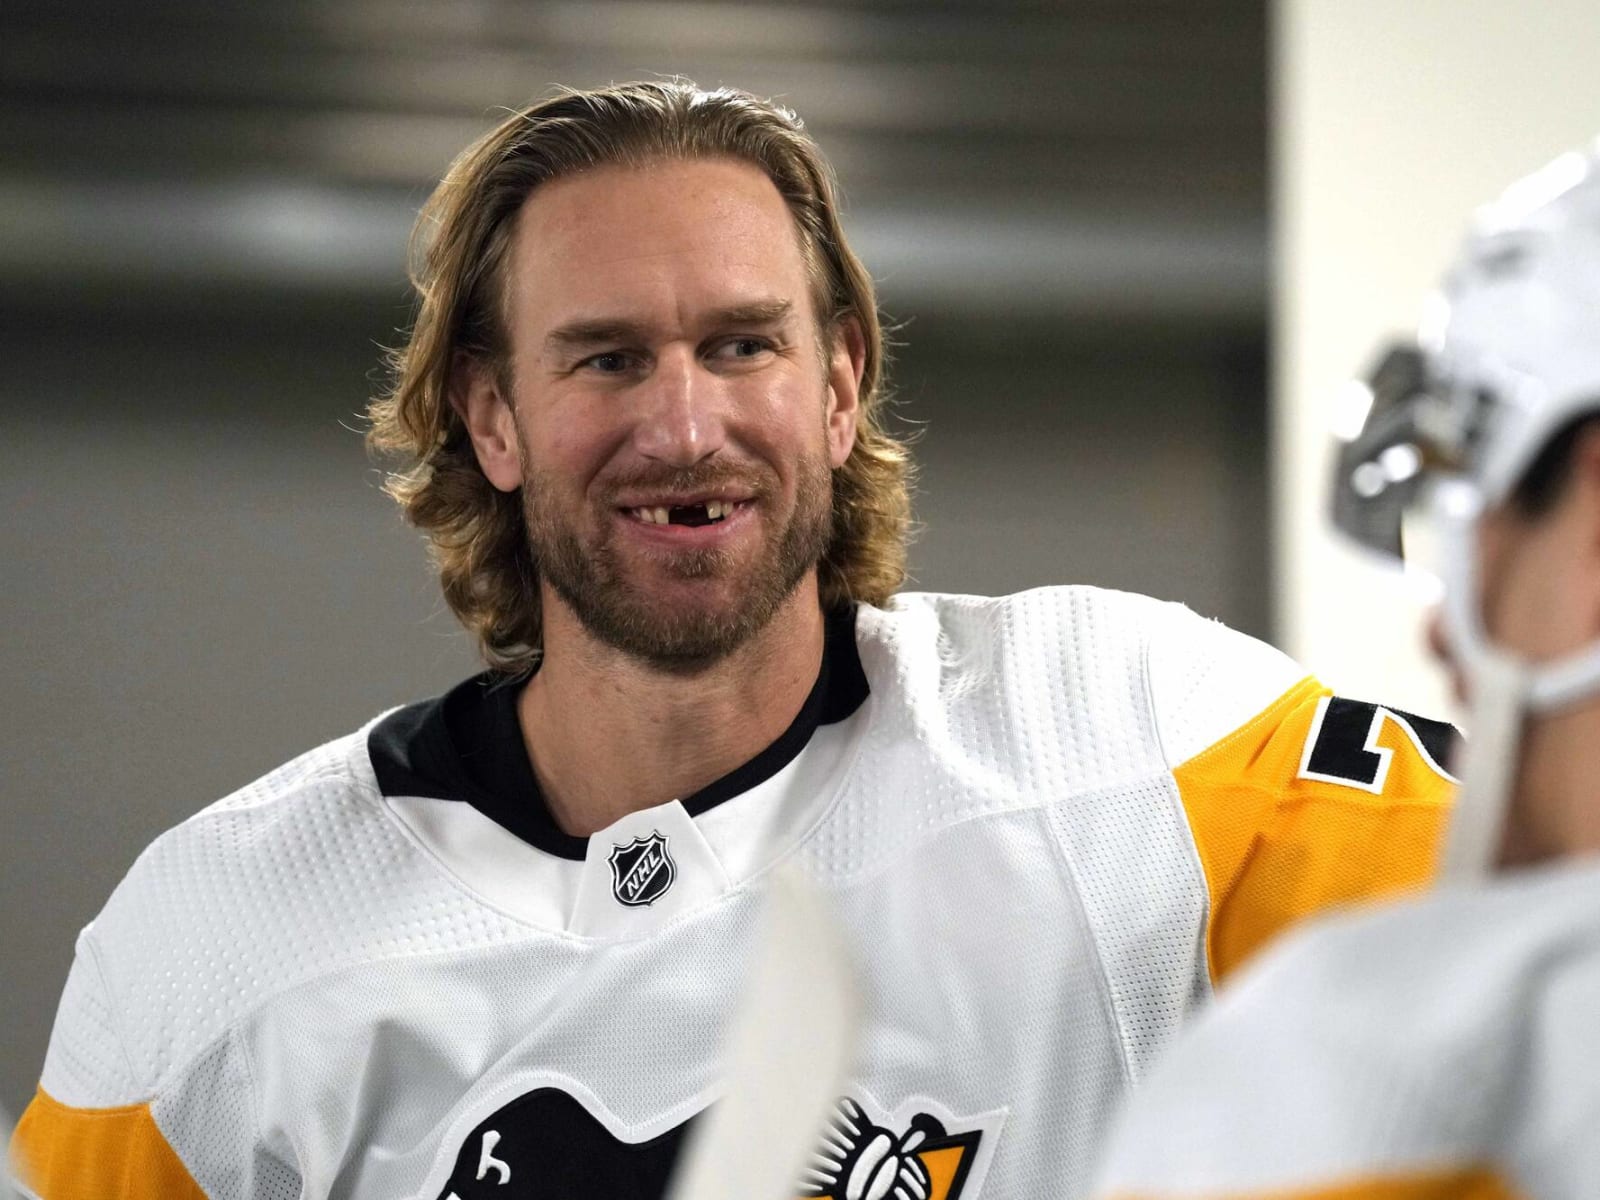 Jeff Carter - NHL Center - News, Stats, Bio and more - The Athletic